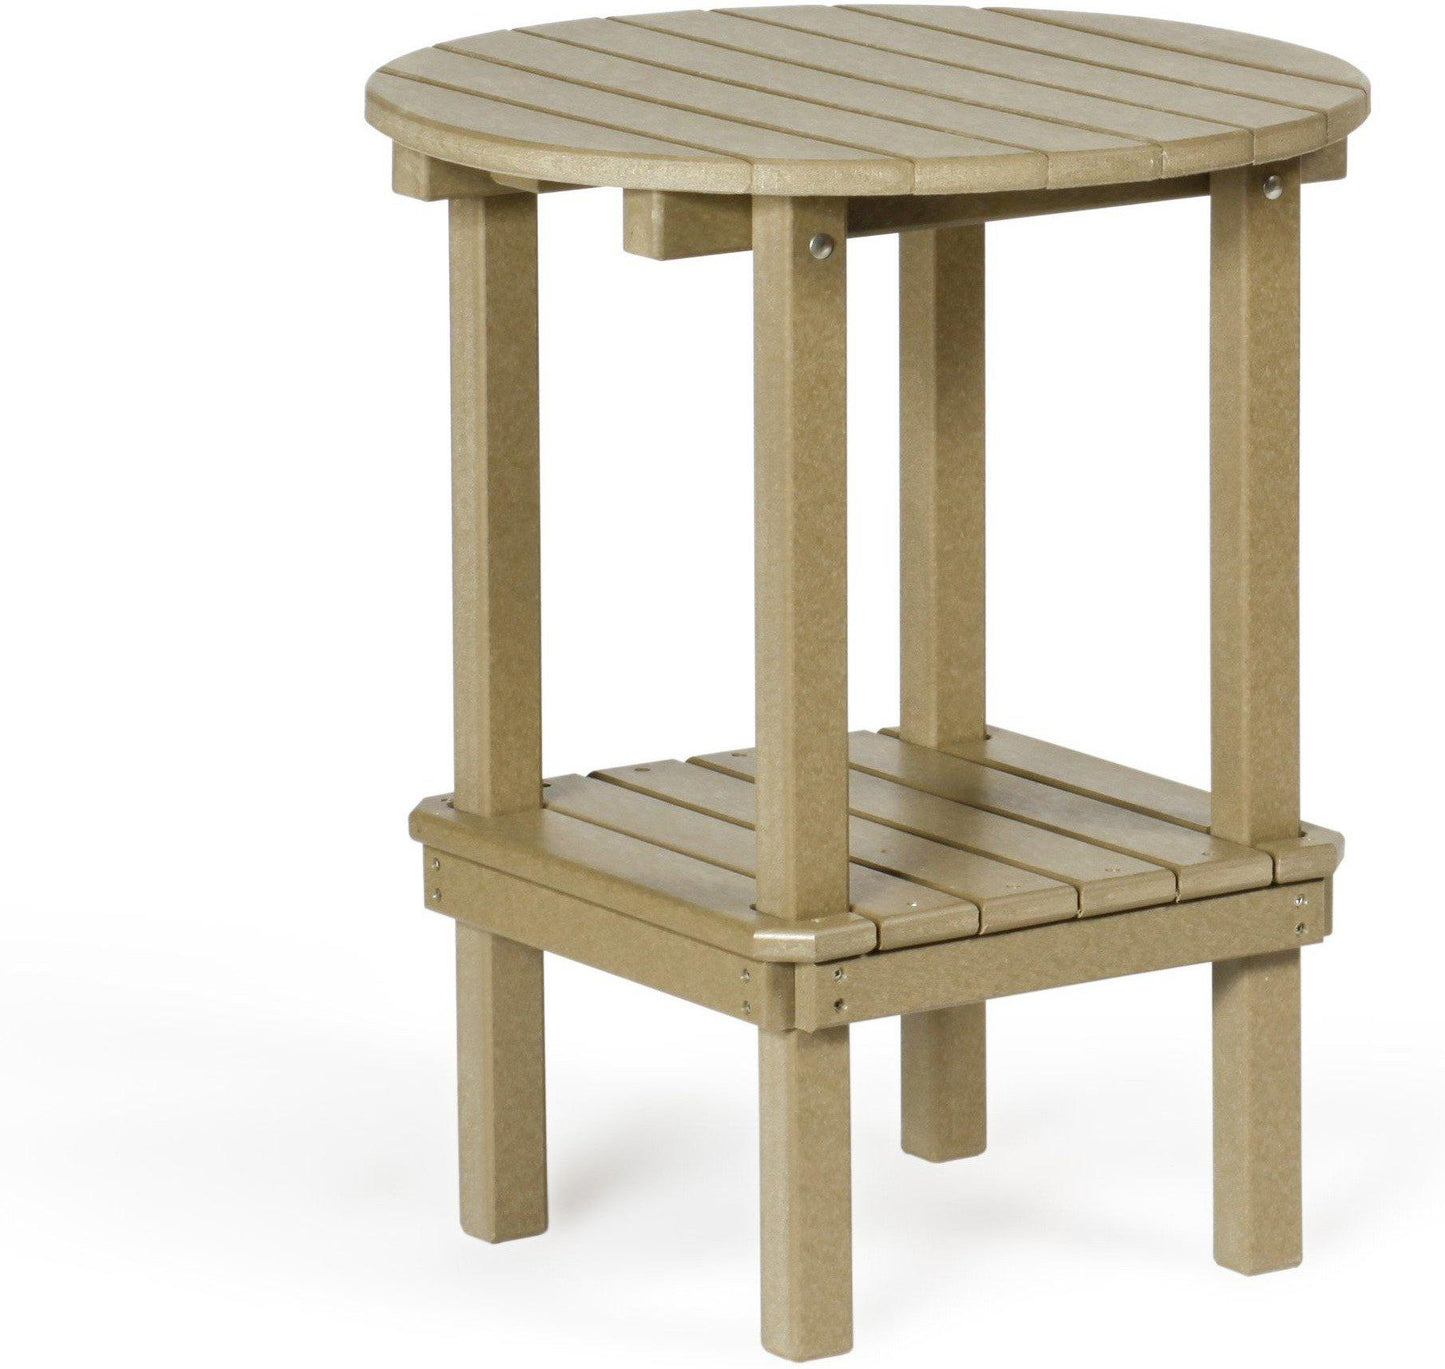 Leisure Lawns Amish Made Recycled Plastic 27" High Double Tier Side Table Model #74 - LEAD TIME TO SHIP 6 WEEKS OR LESS